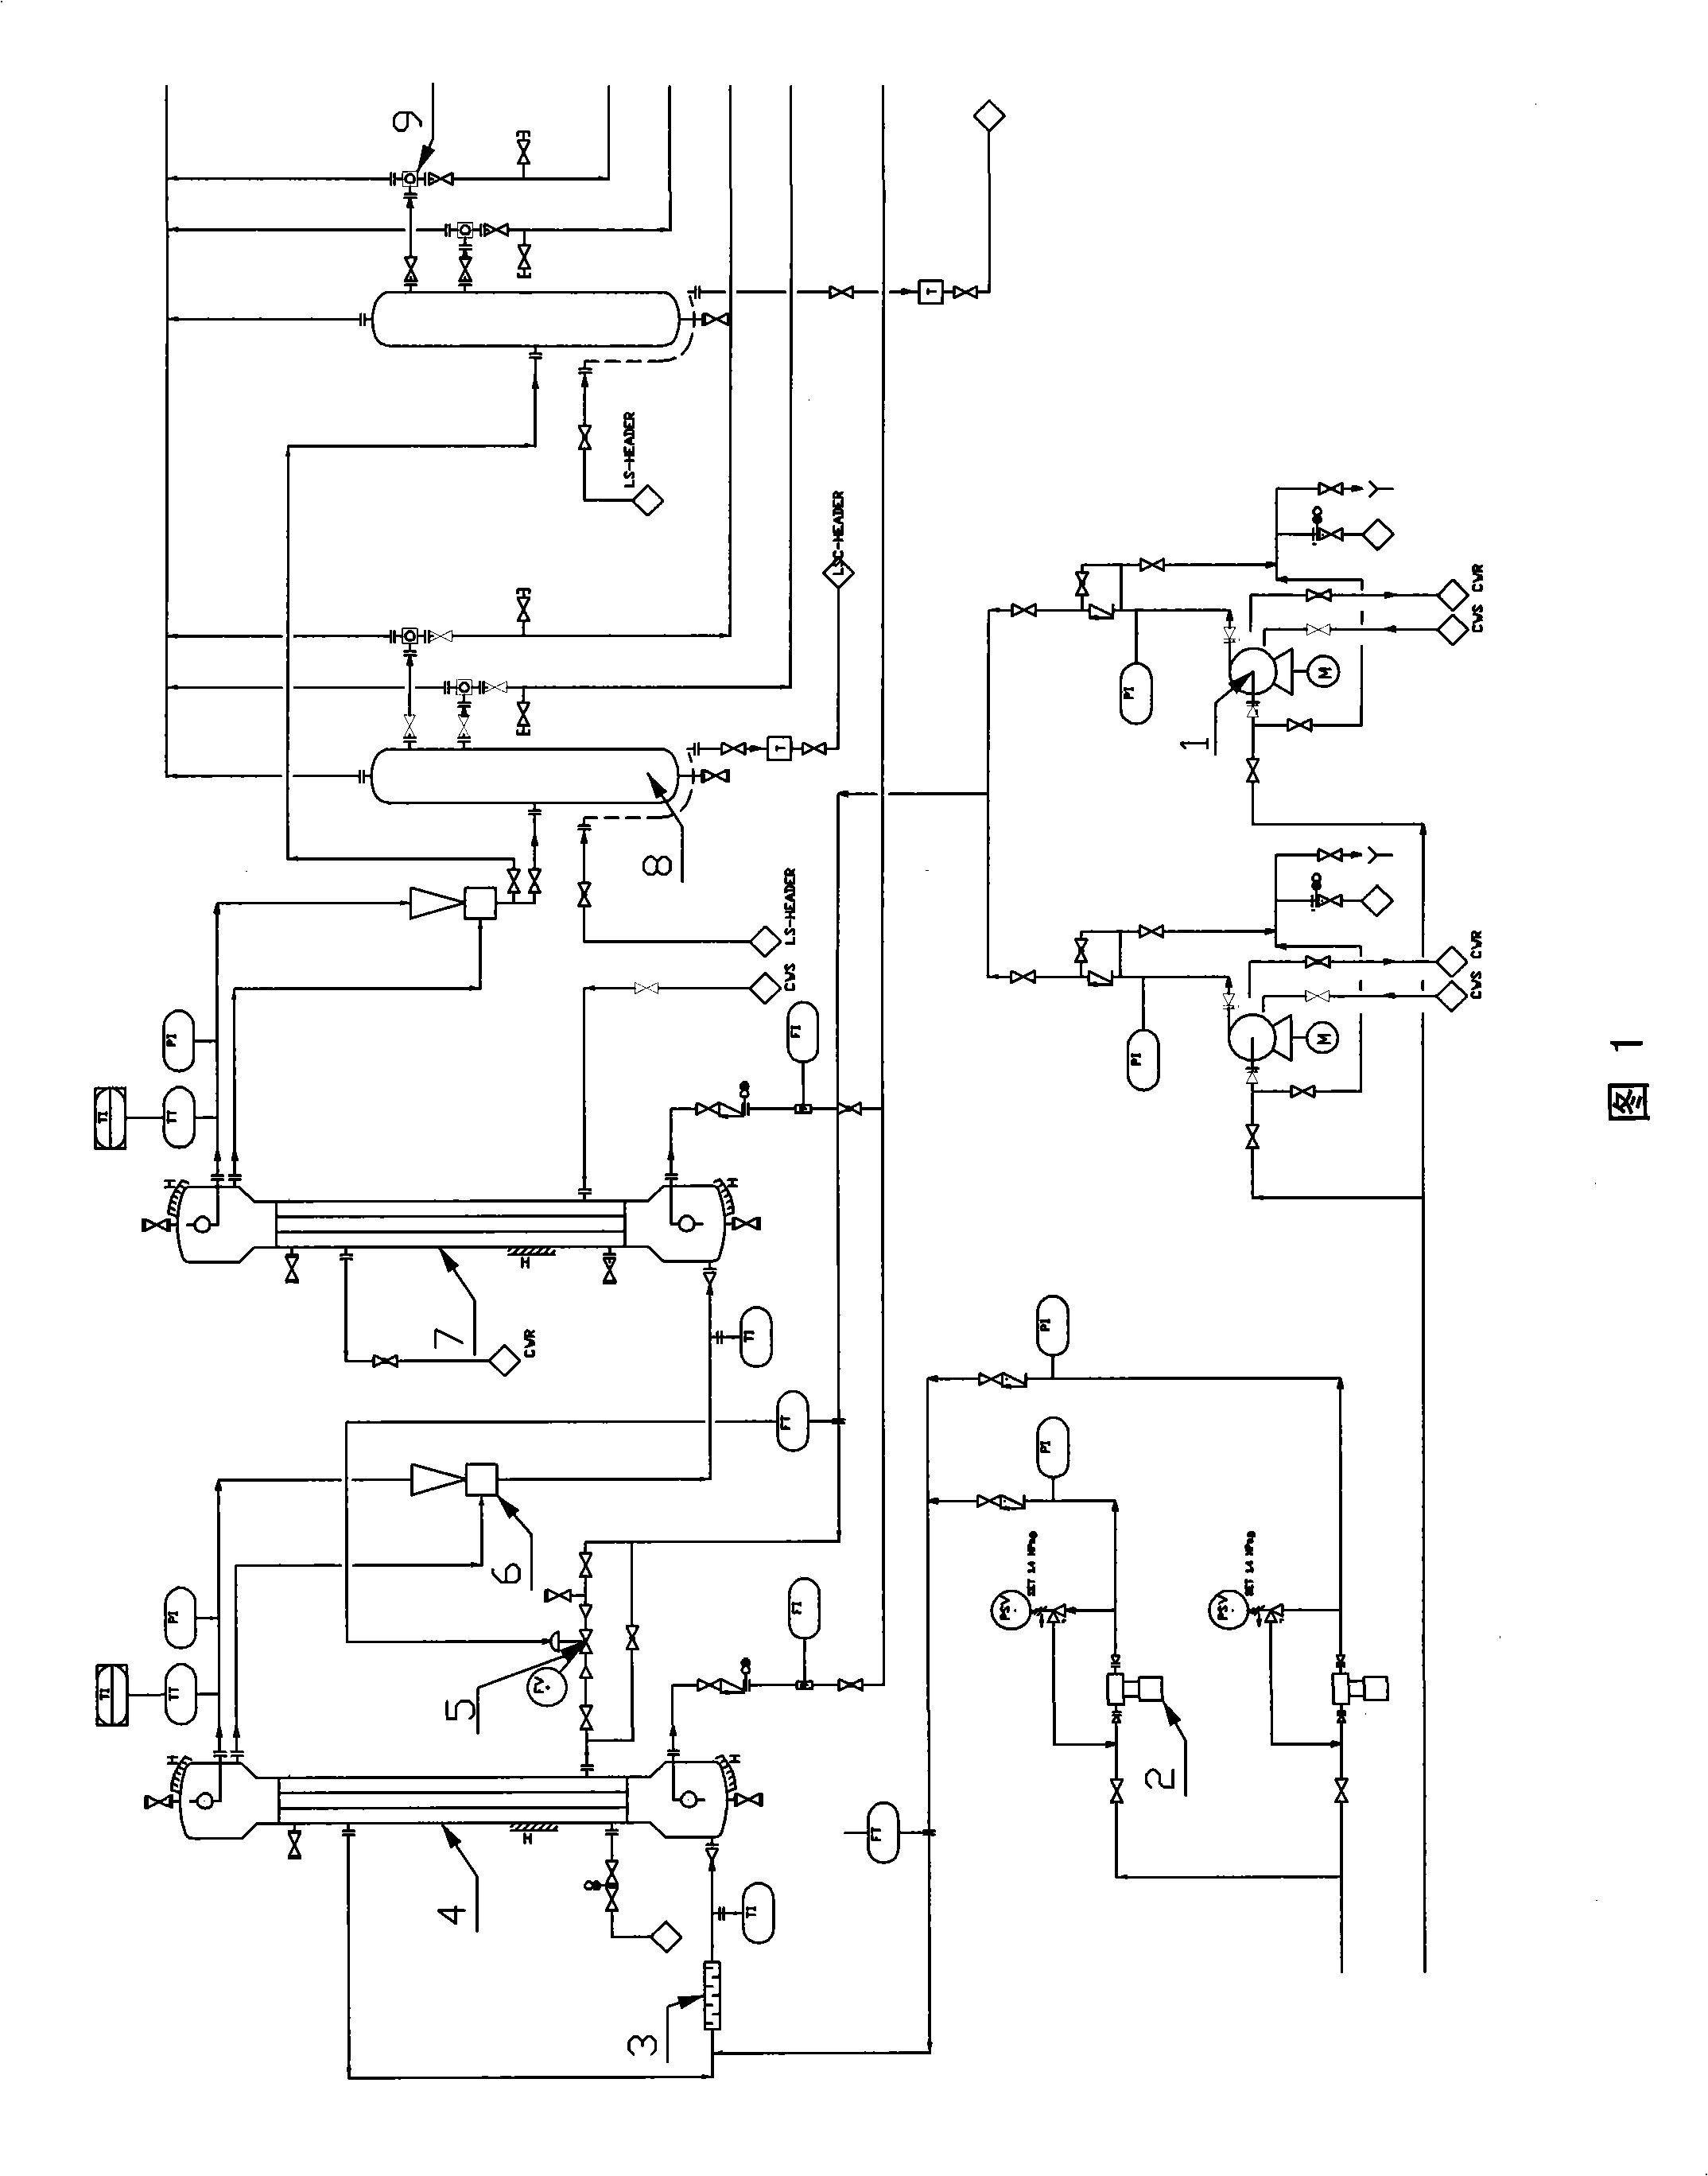 Novel process flow and apparatus for decomposing phenate